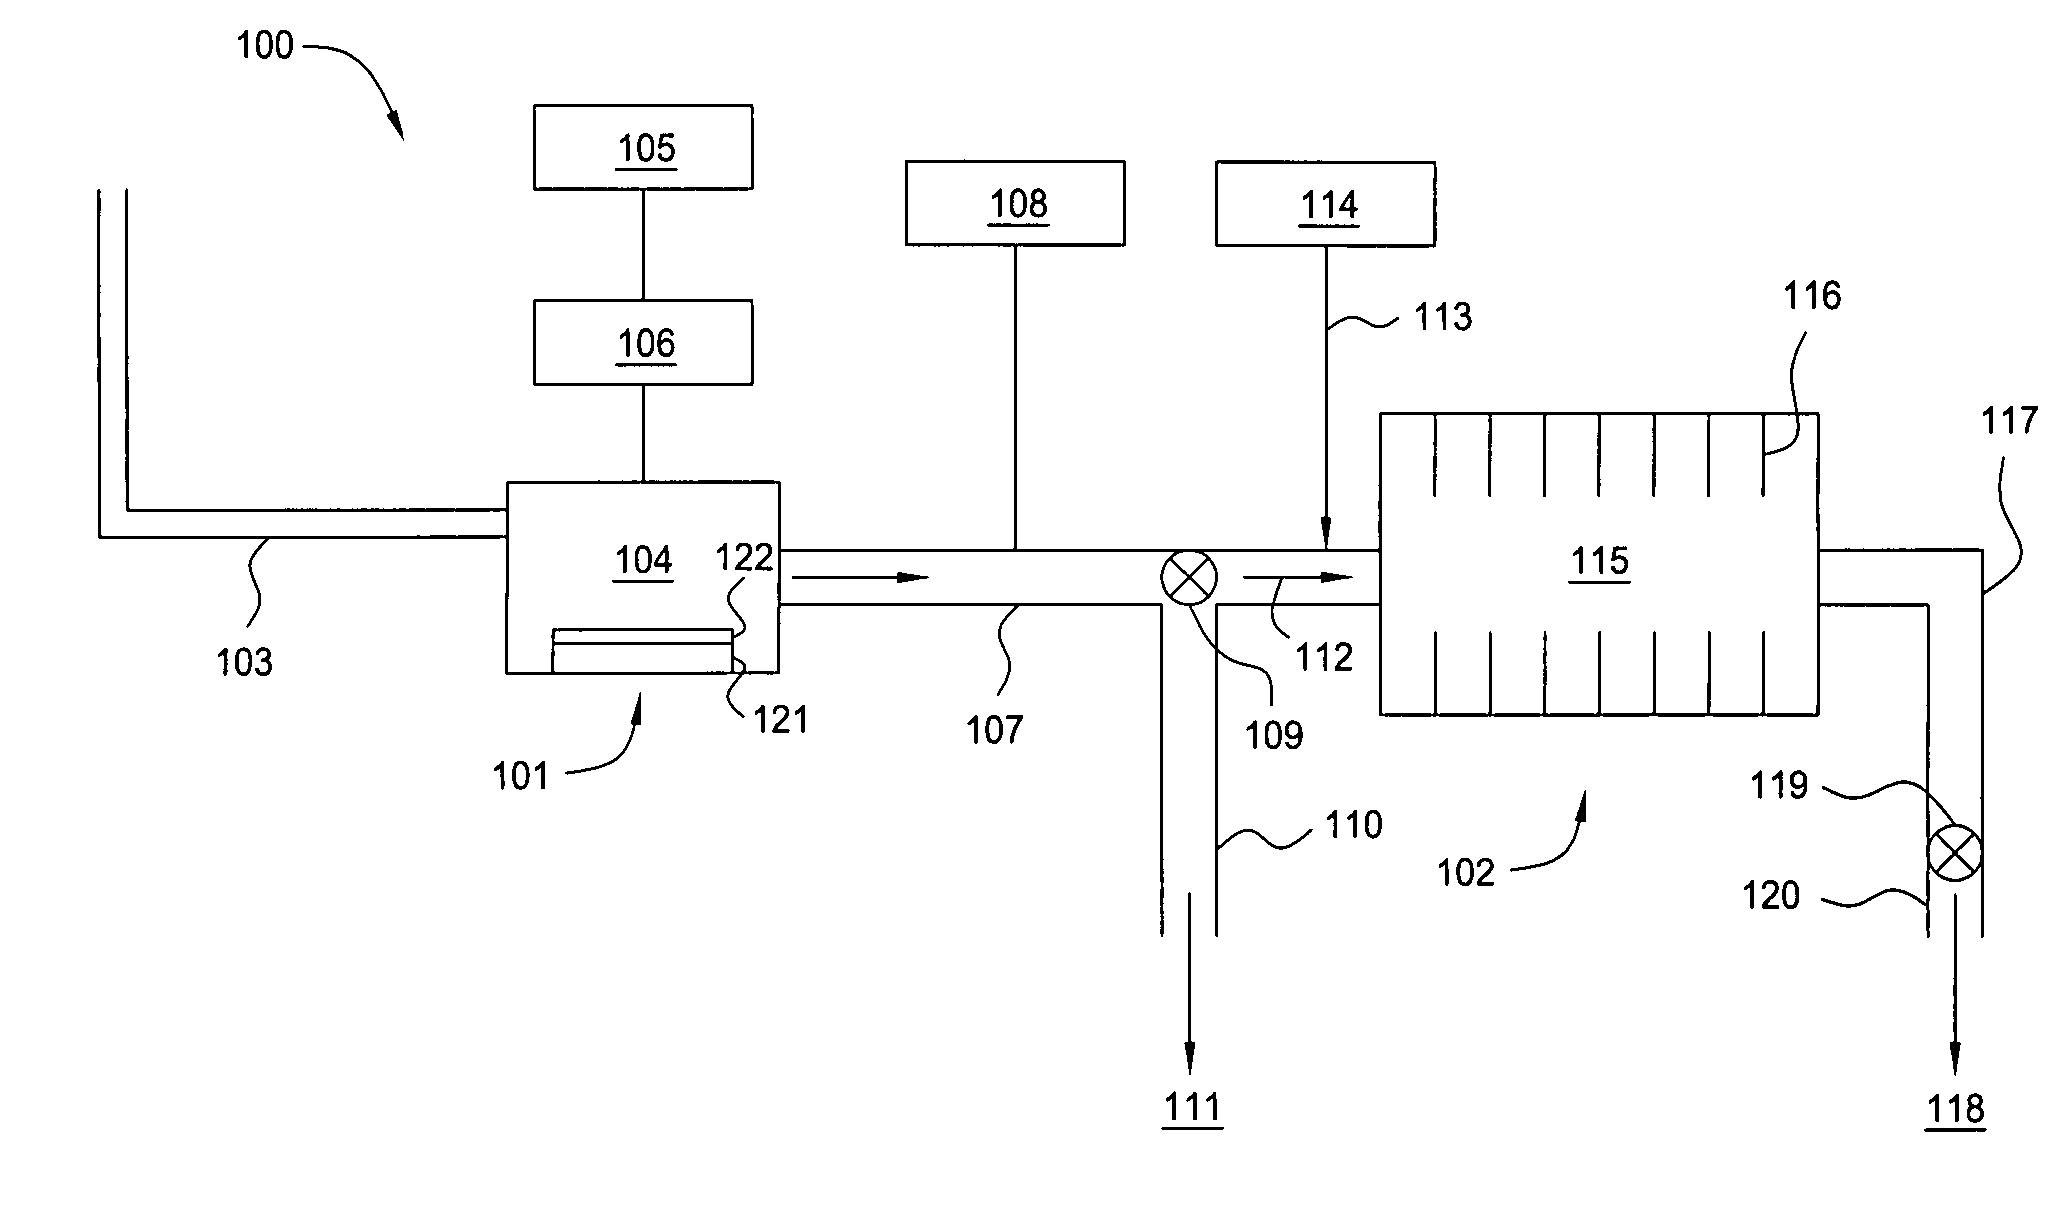 Method of recovering valuable material from exhaust gas stream of a reaction chamber